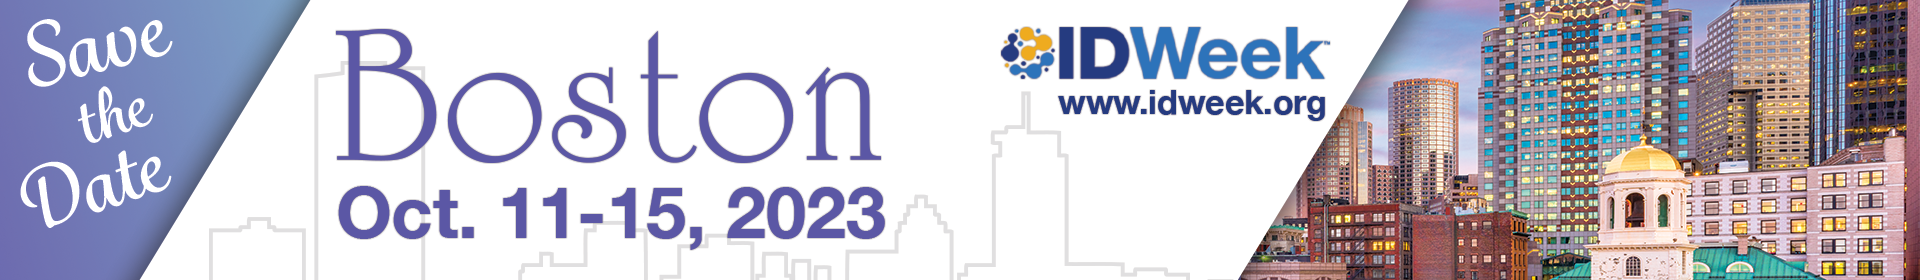 IDWeek 2023 Abstracts Event Banner